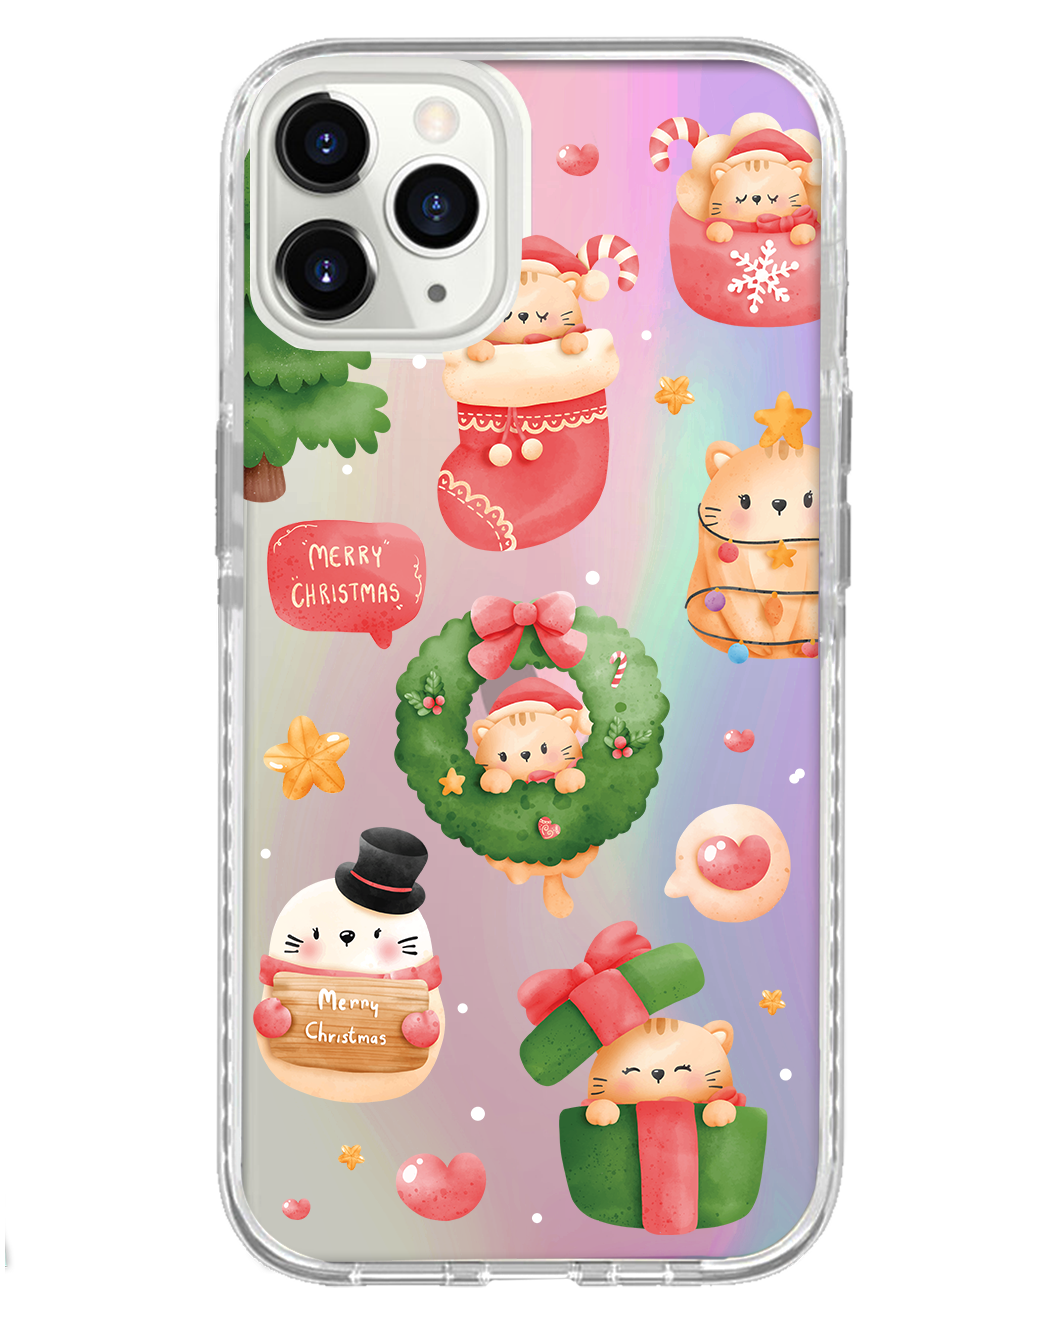 iPhone Rearguard Holo - Storybook Christmas 1.0